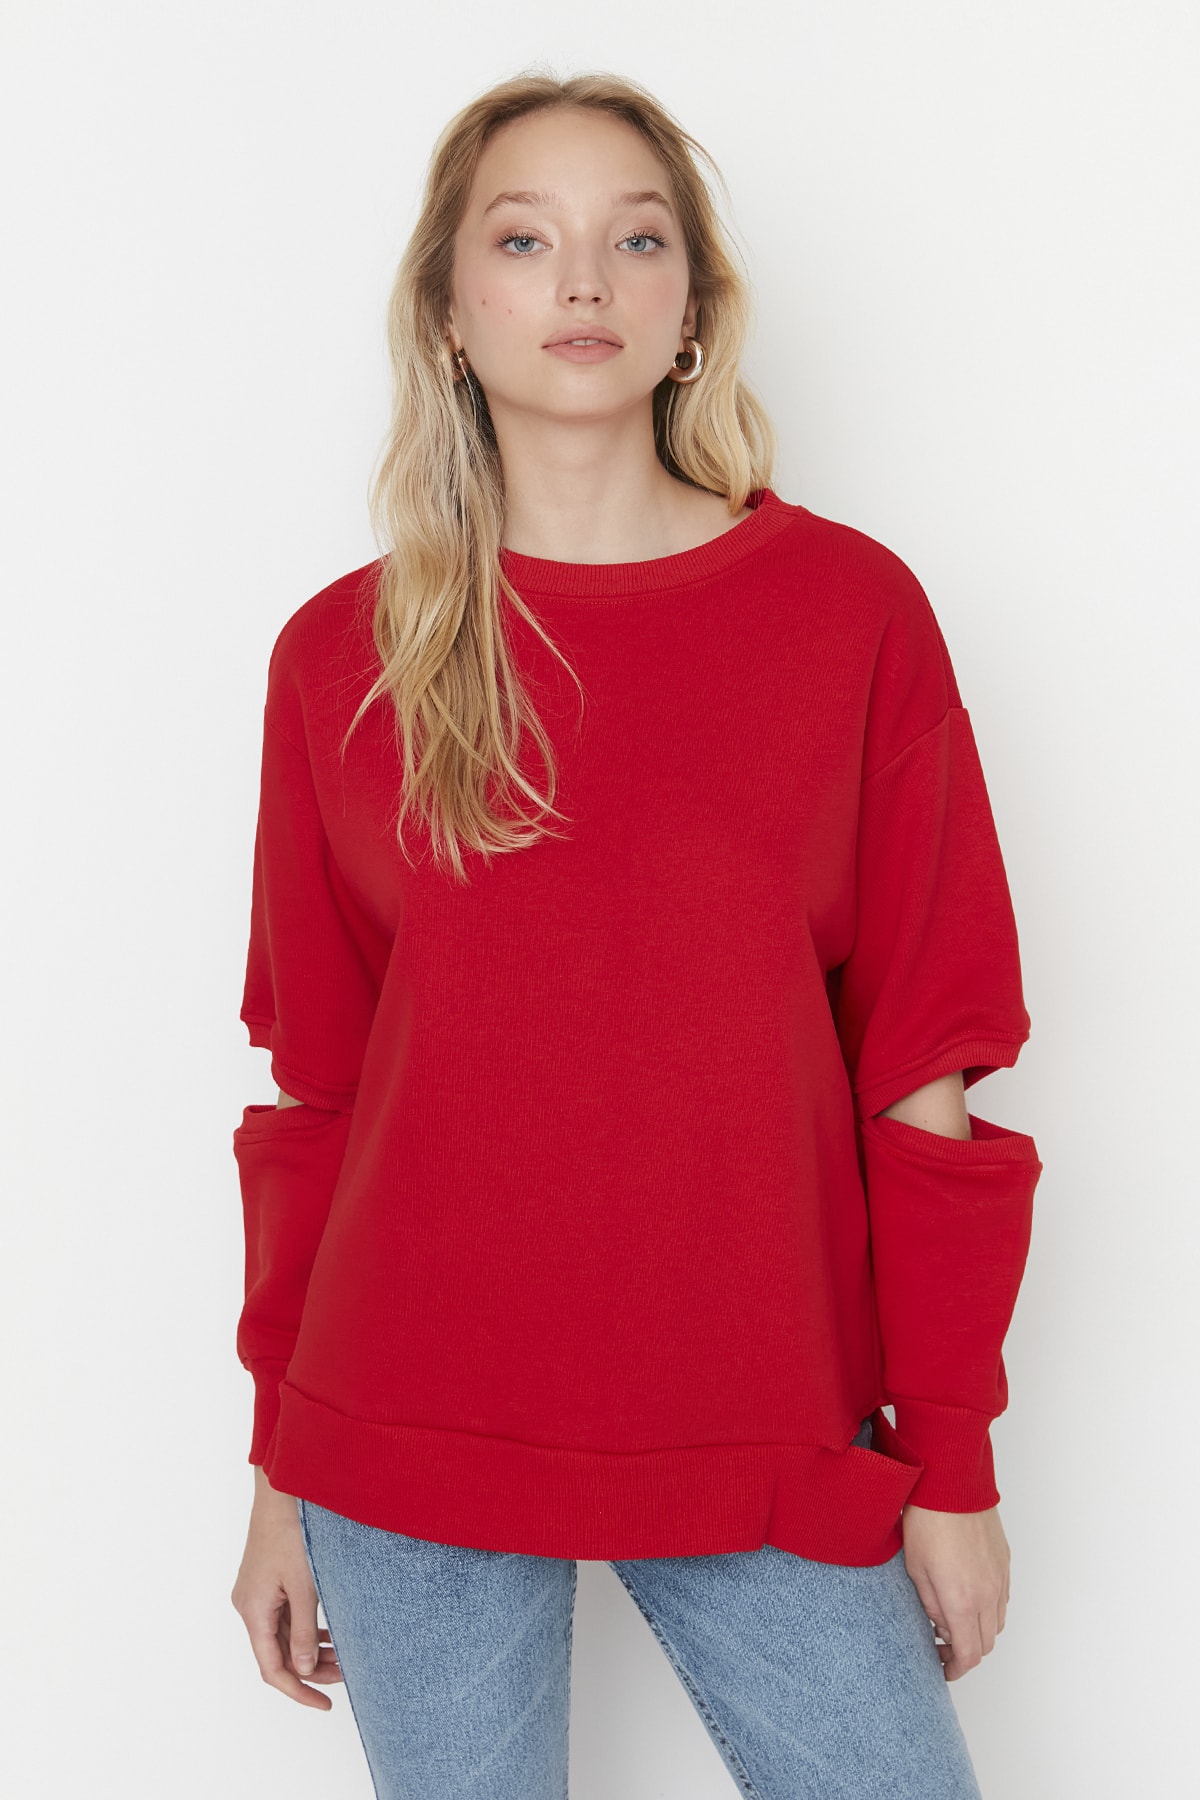 Trendyol Red Cut Out Detailed Knitted Sweatshirt With Fleece Inside